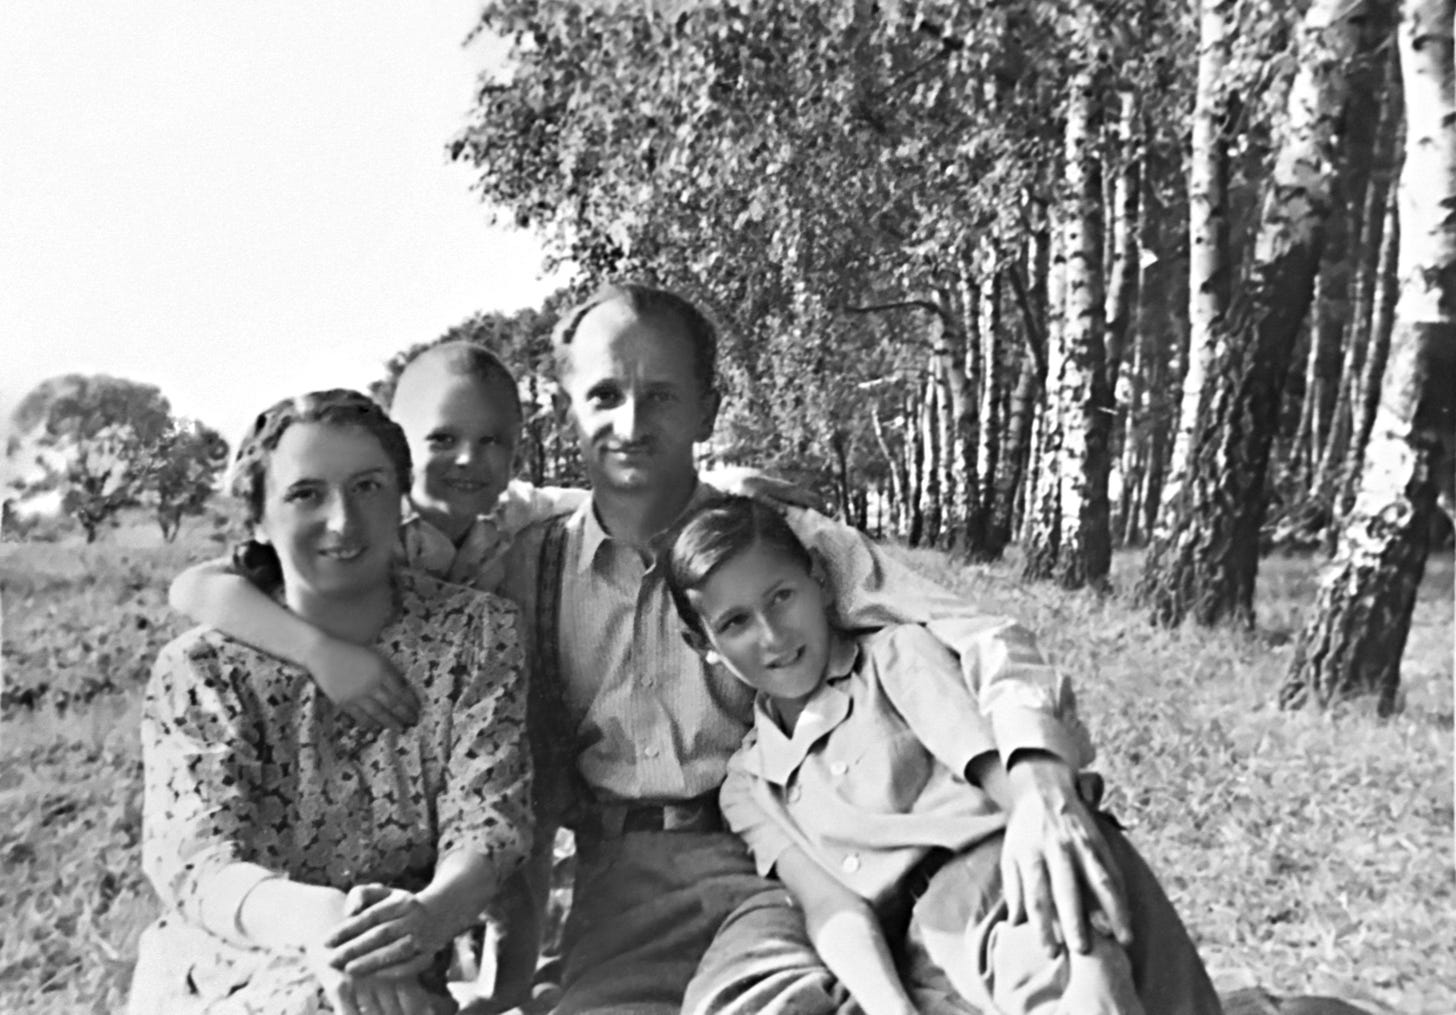 Image description: an outdoor photo of young Michael standing behind his mother and father, with his older brother, Stanisław, seated, with trees in the background.